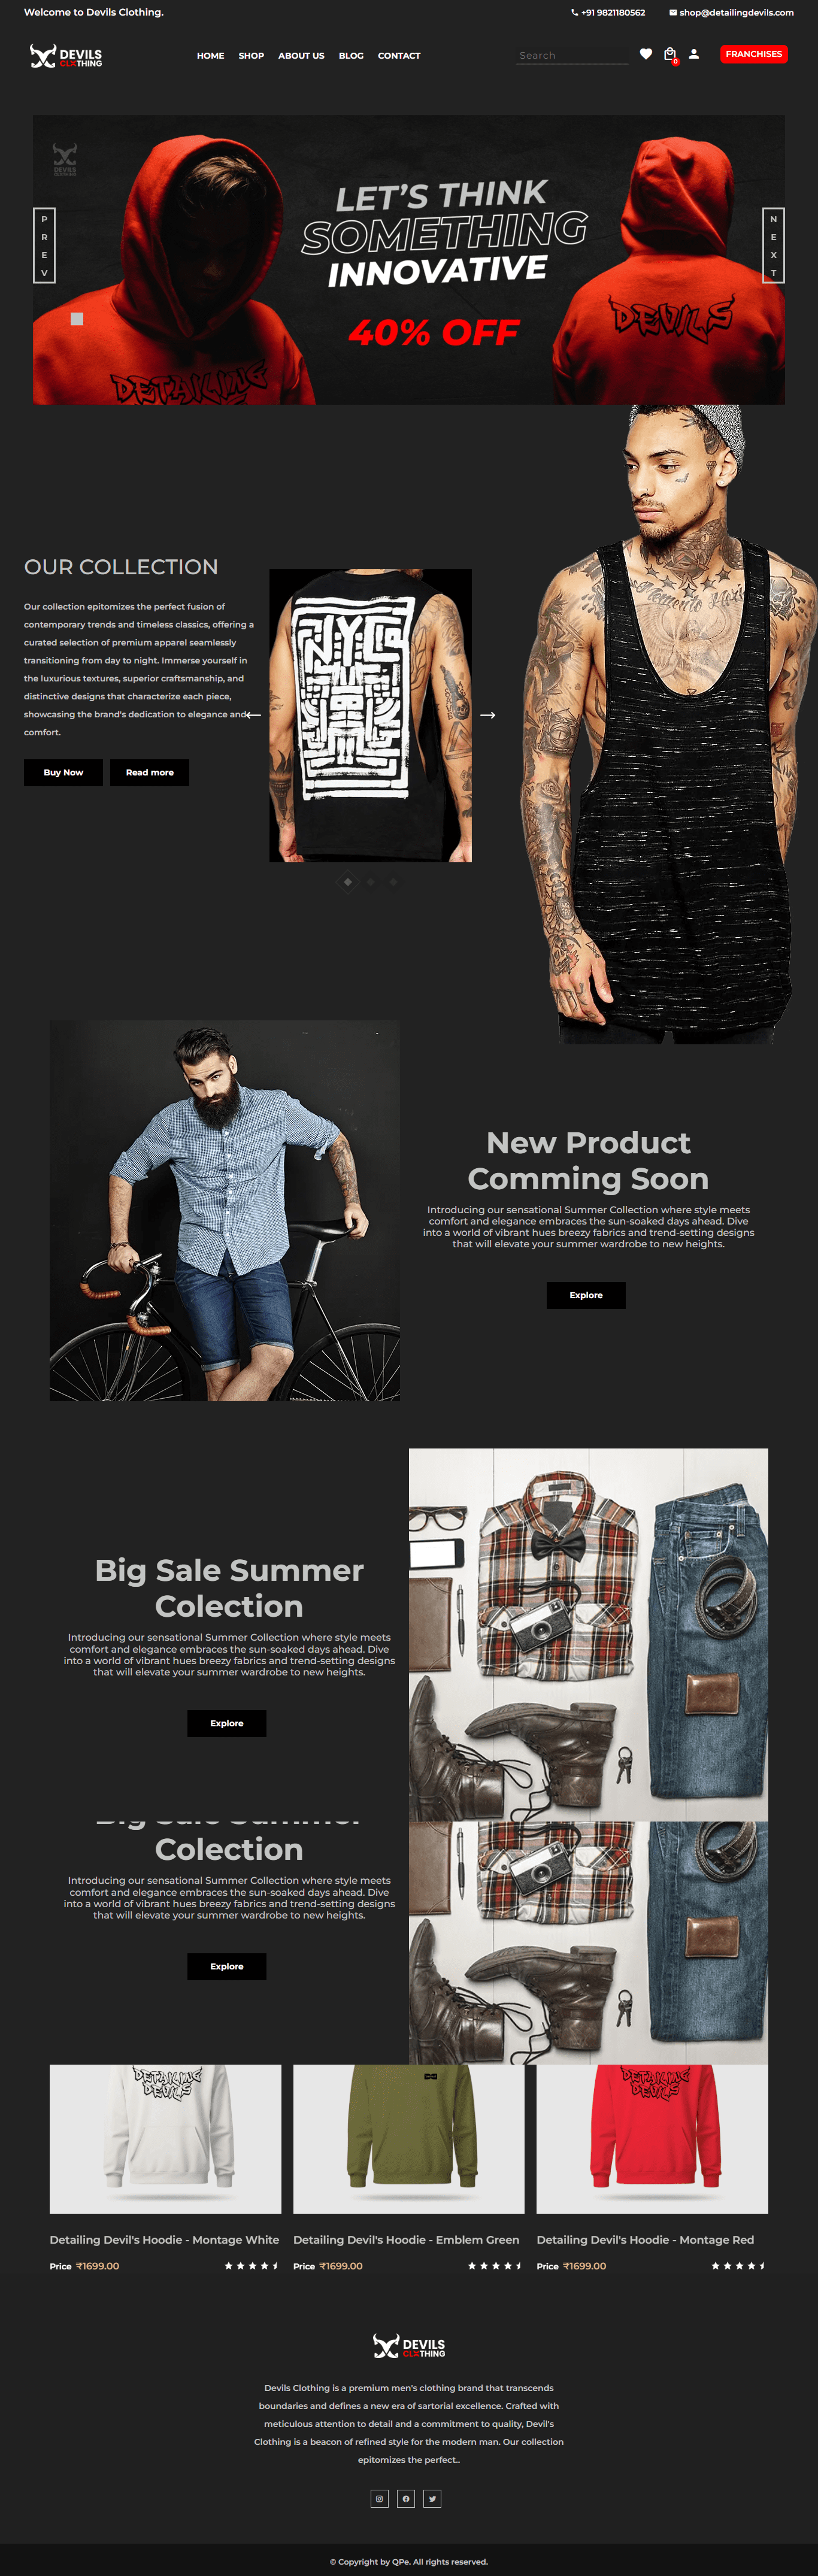 Clothing  ecommerce free webste template (theme)